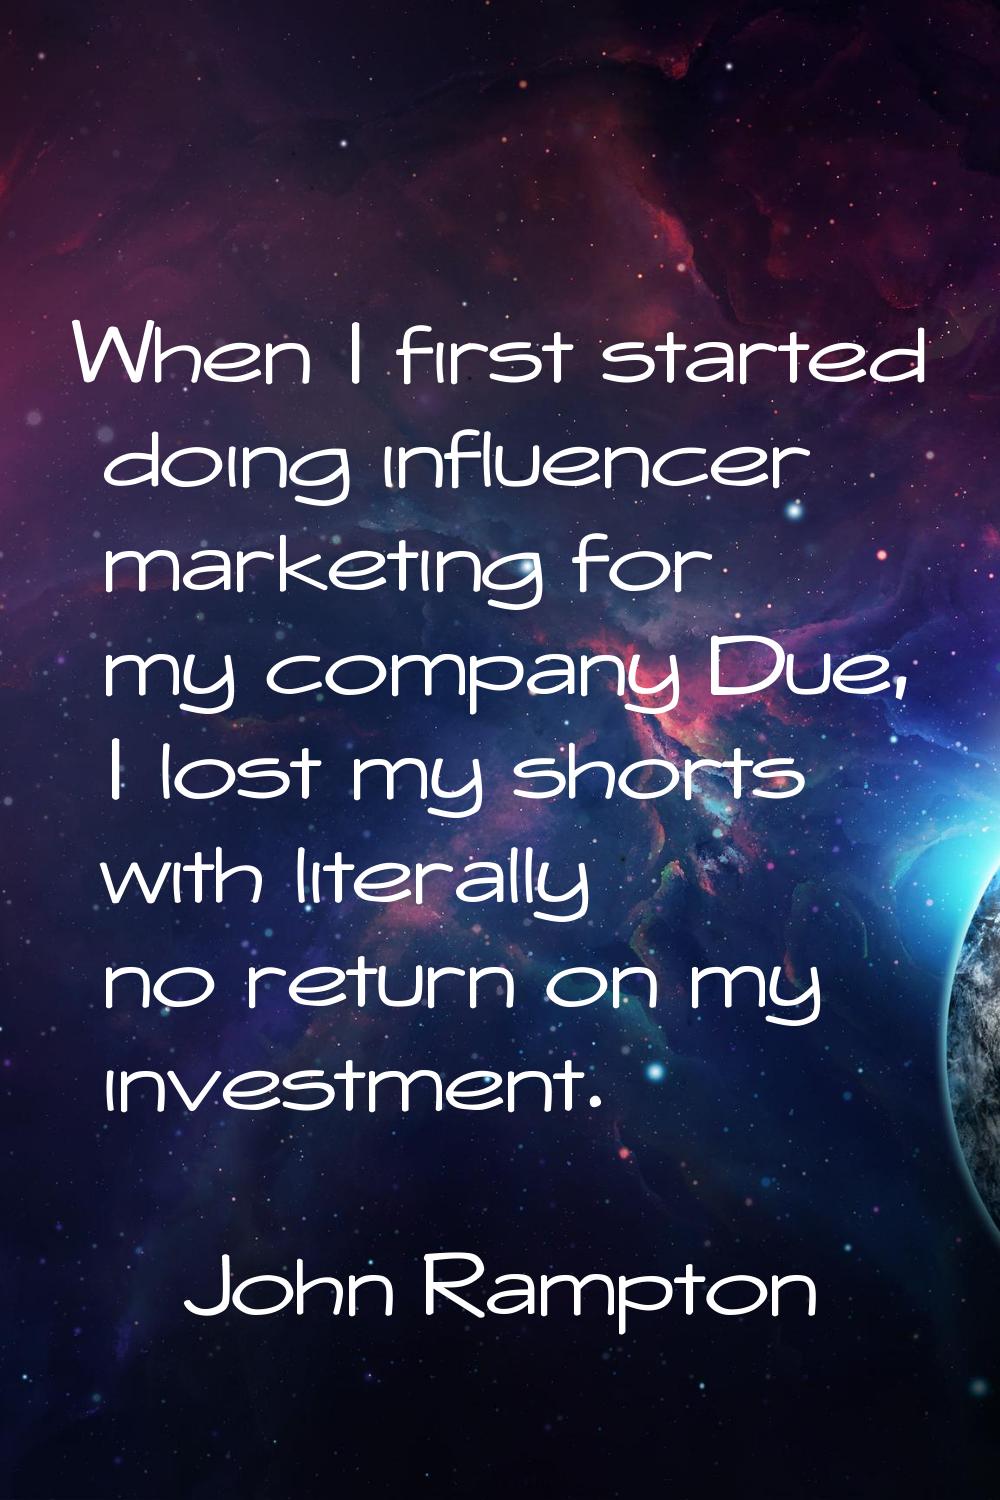 When I first started doing influencer marketing for my company Due, I lost my shorts with literally